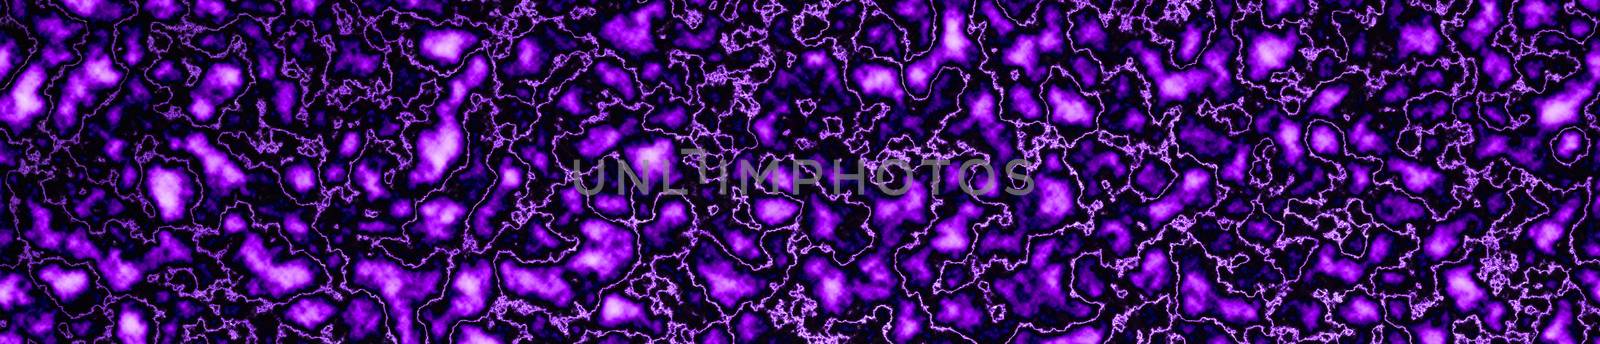 panorama Amethyst abstract line art marble pattern texture luxur by Darkfox